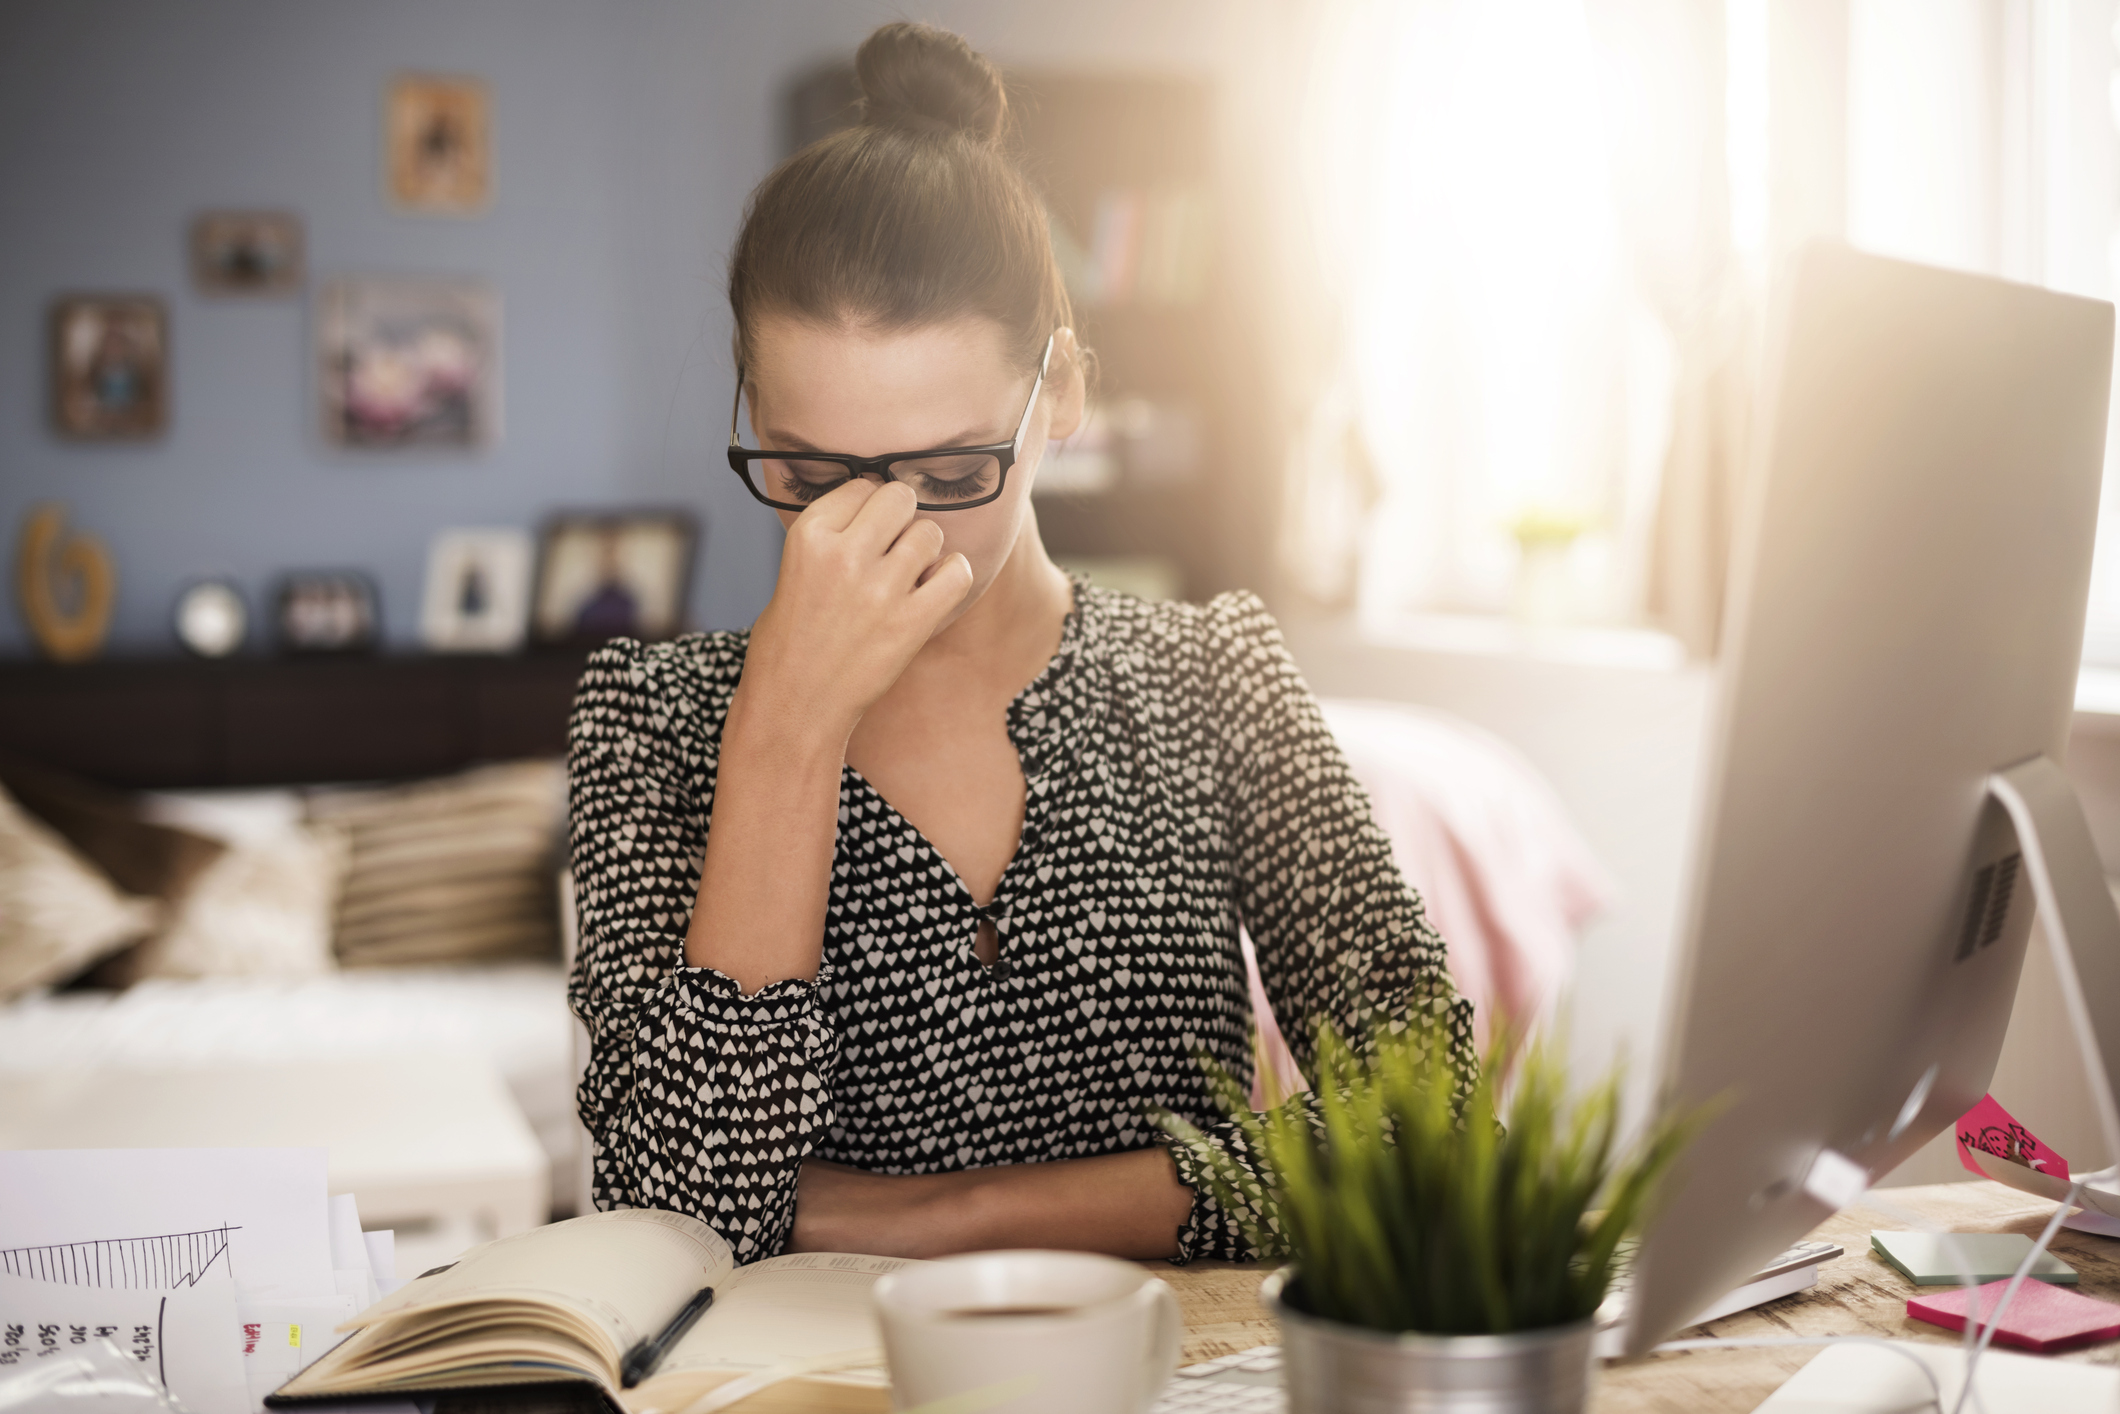 Generic photo of woman at a desk rubbing her eyes (Thinkstock/PA)